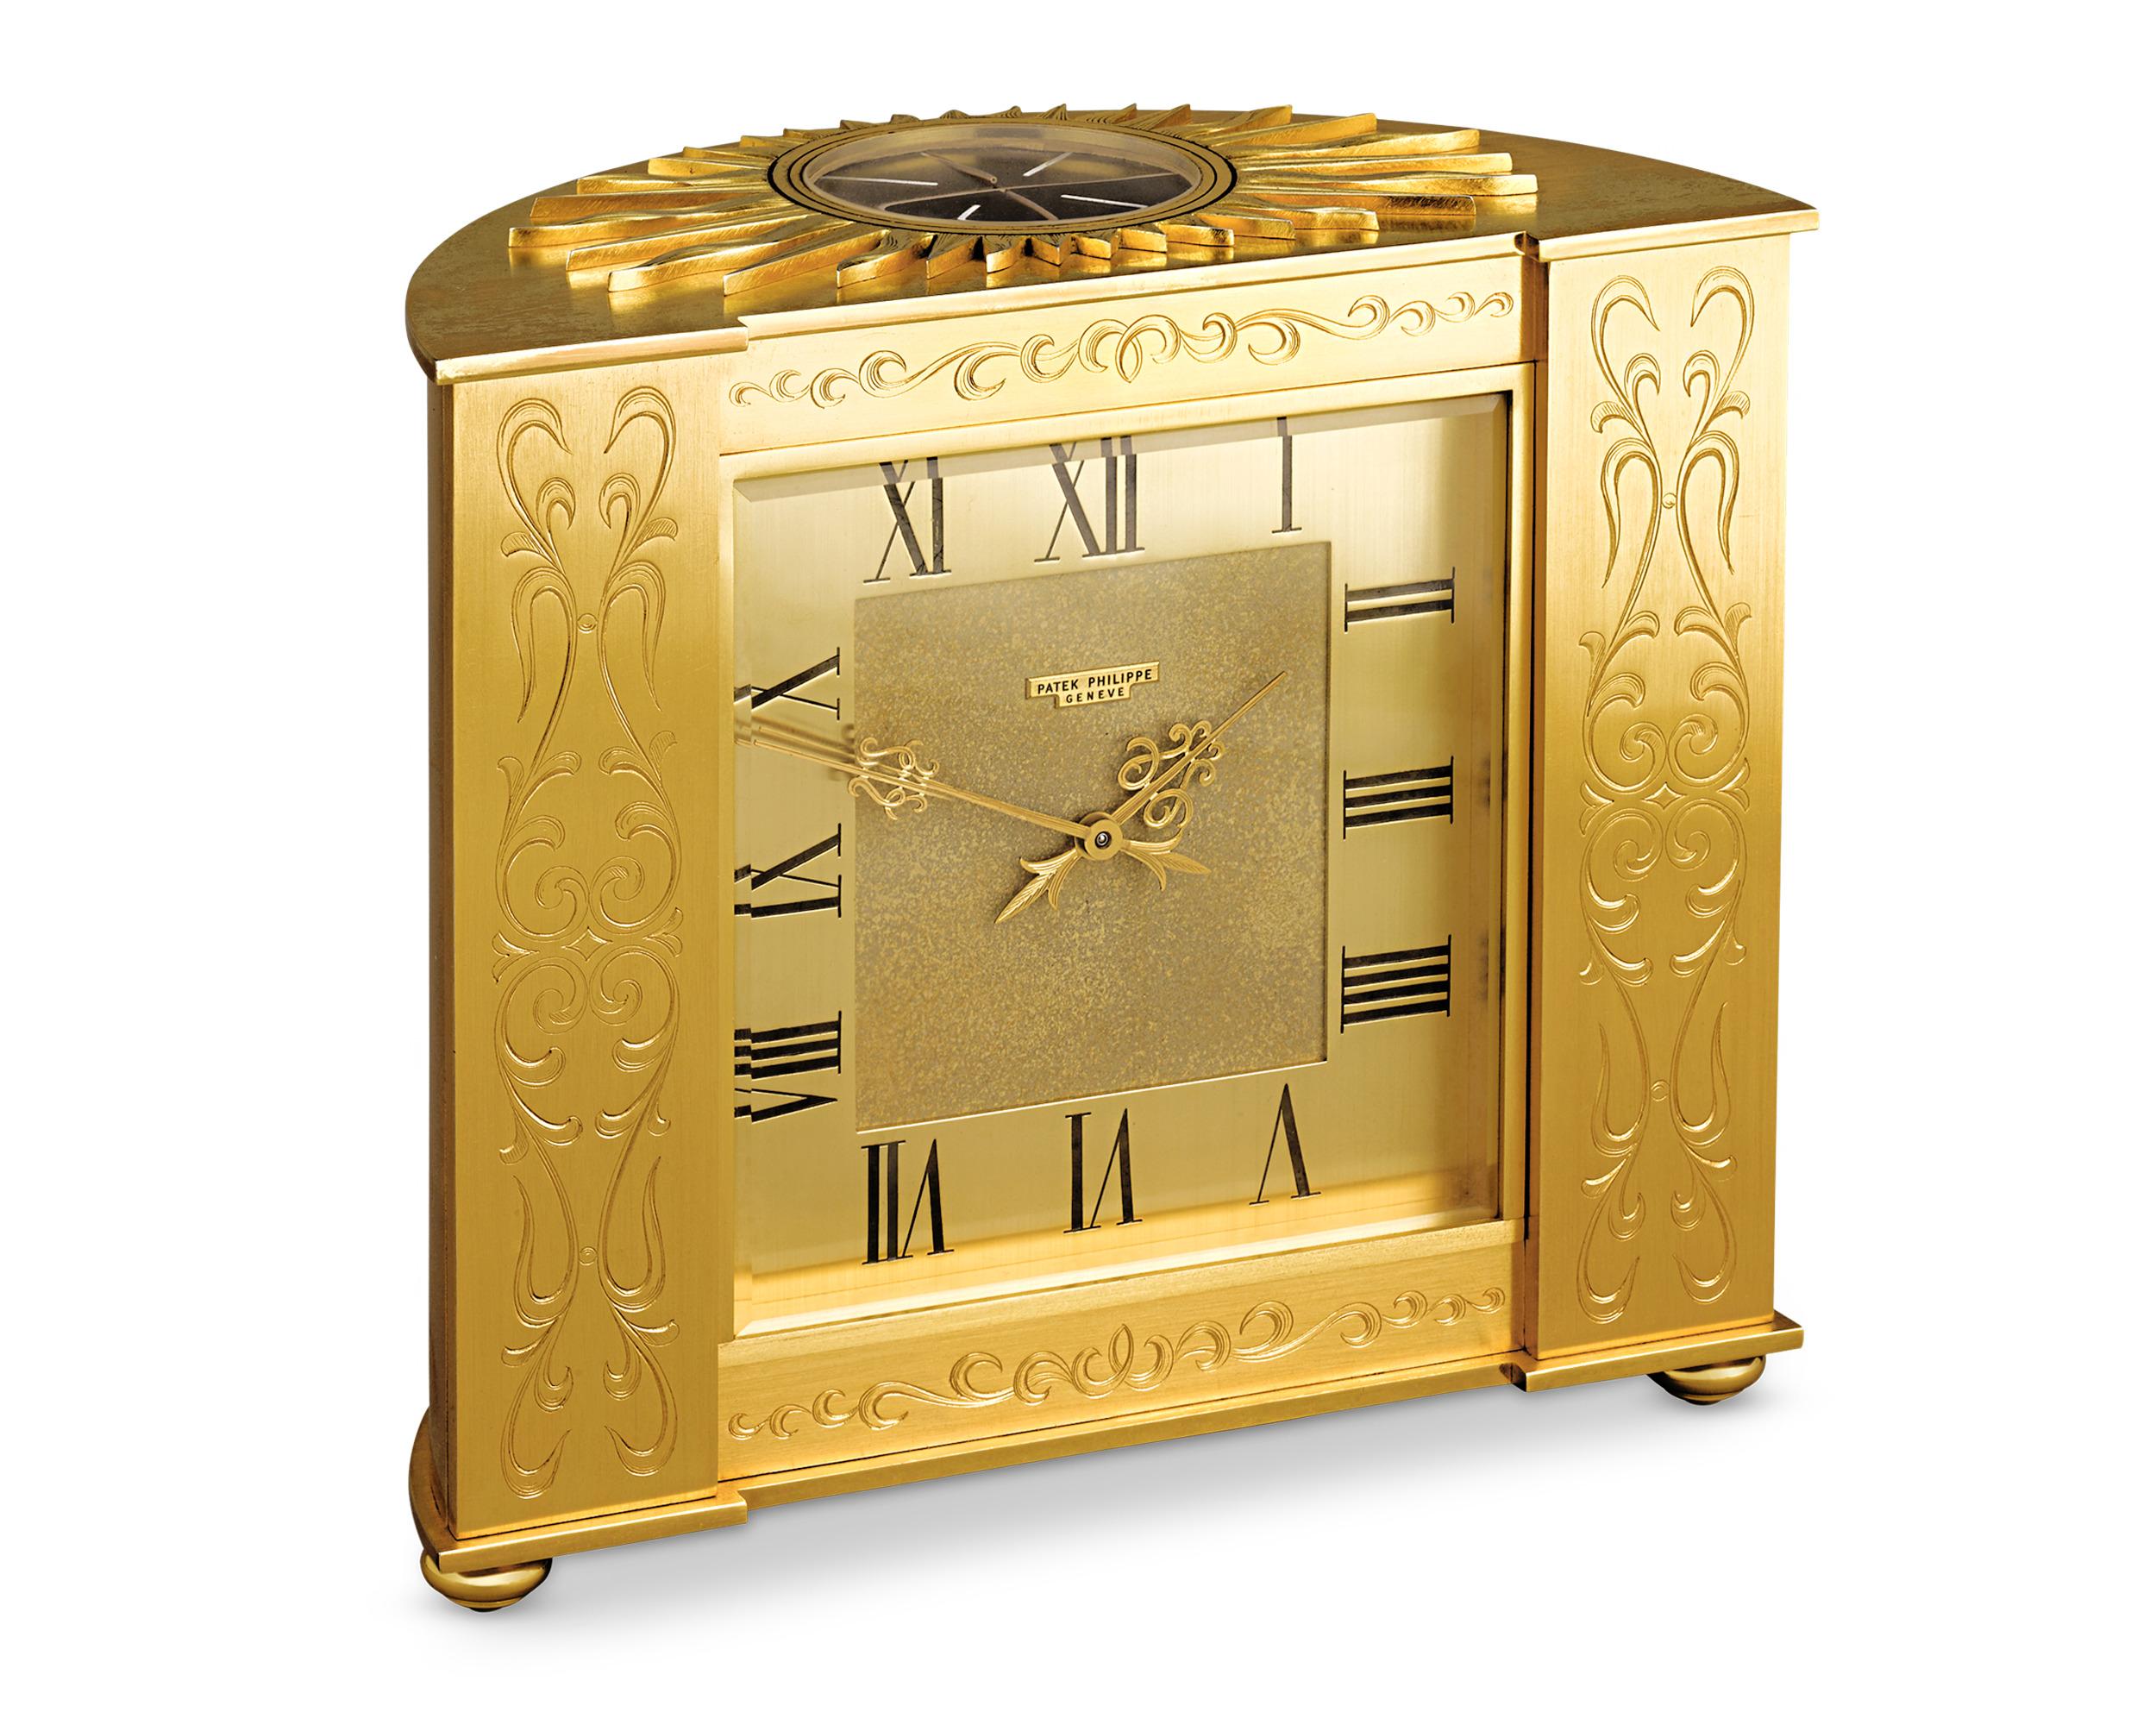 This rare 1961 solar clock by Patek Philippe has an Empire-inspired aesthetic, exuding timeless luxury. Featuring a demi-lune shaped case and ornate engraved designs, this gilded brass clock is topped with a hand-carved sun motif surrounding its